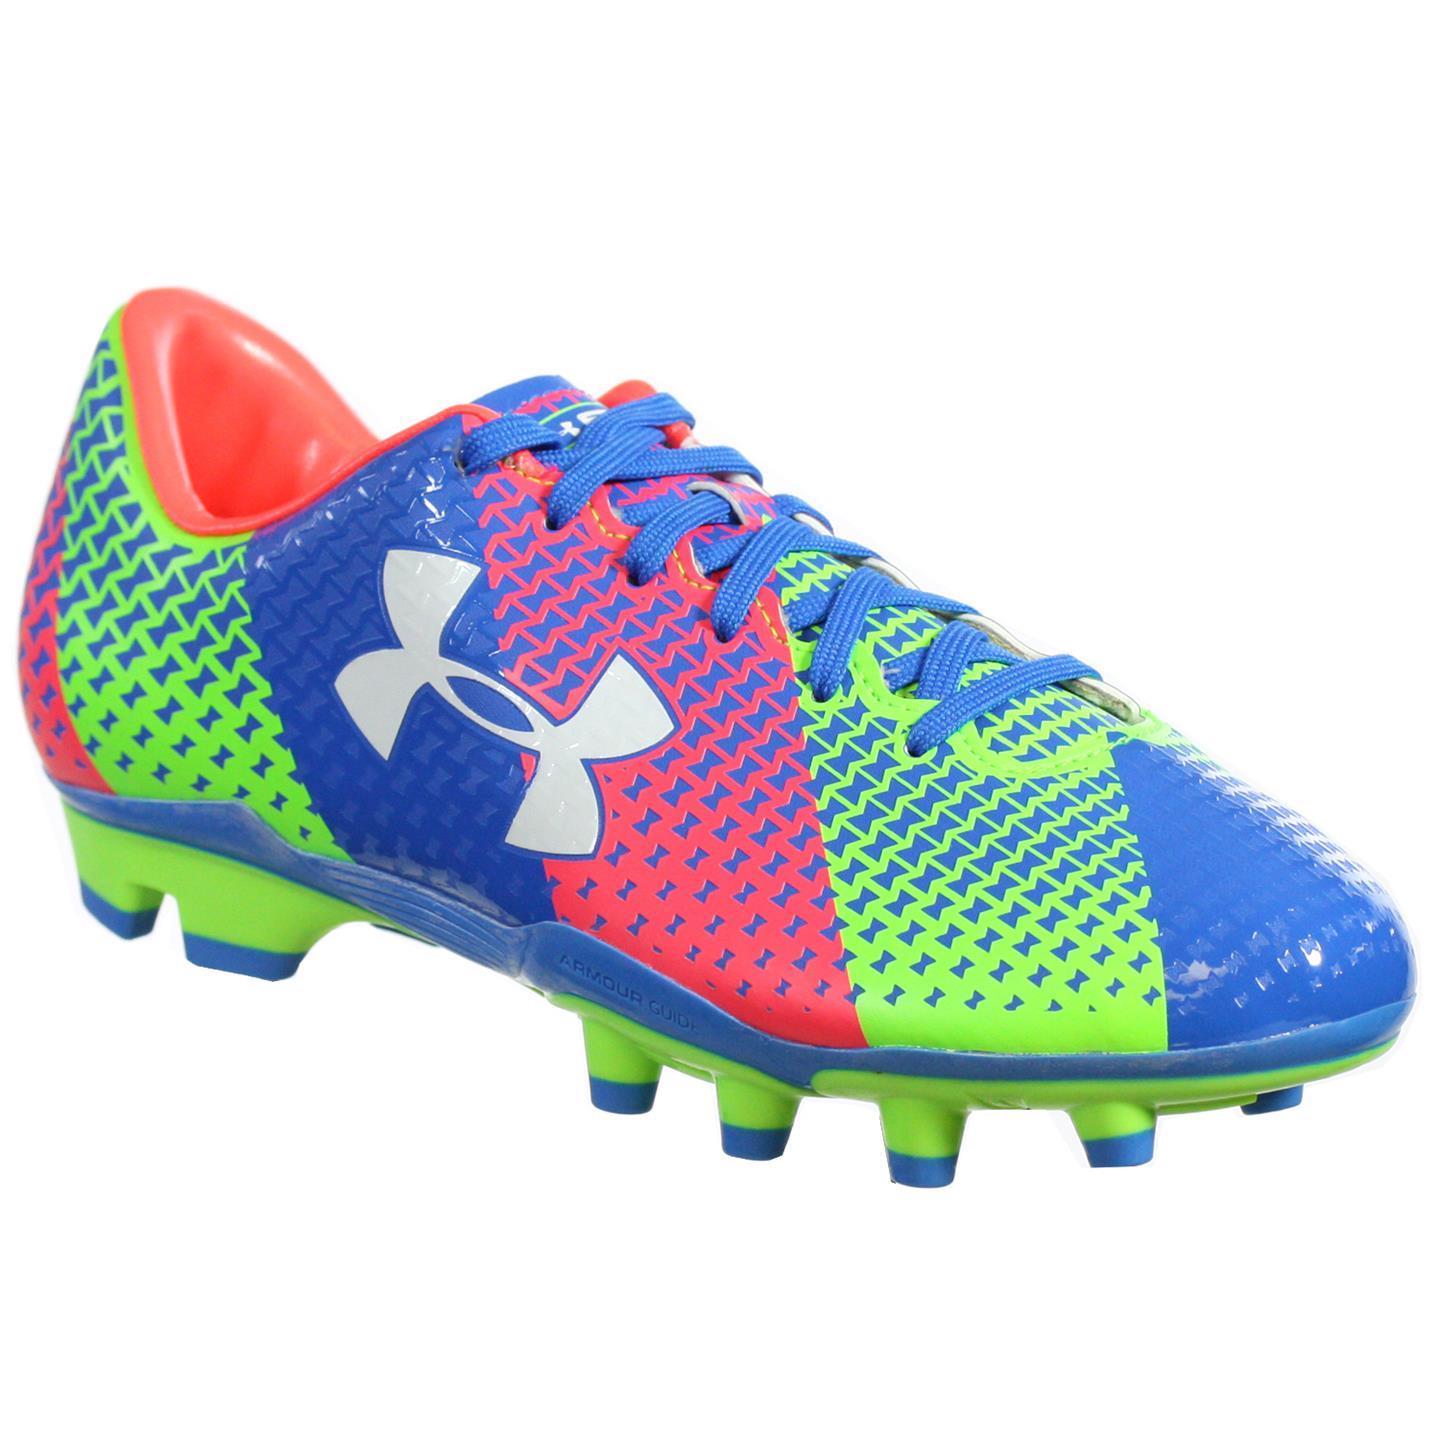 blue and orange under armour cleats